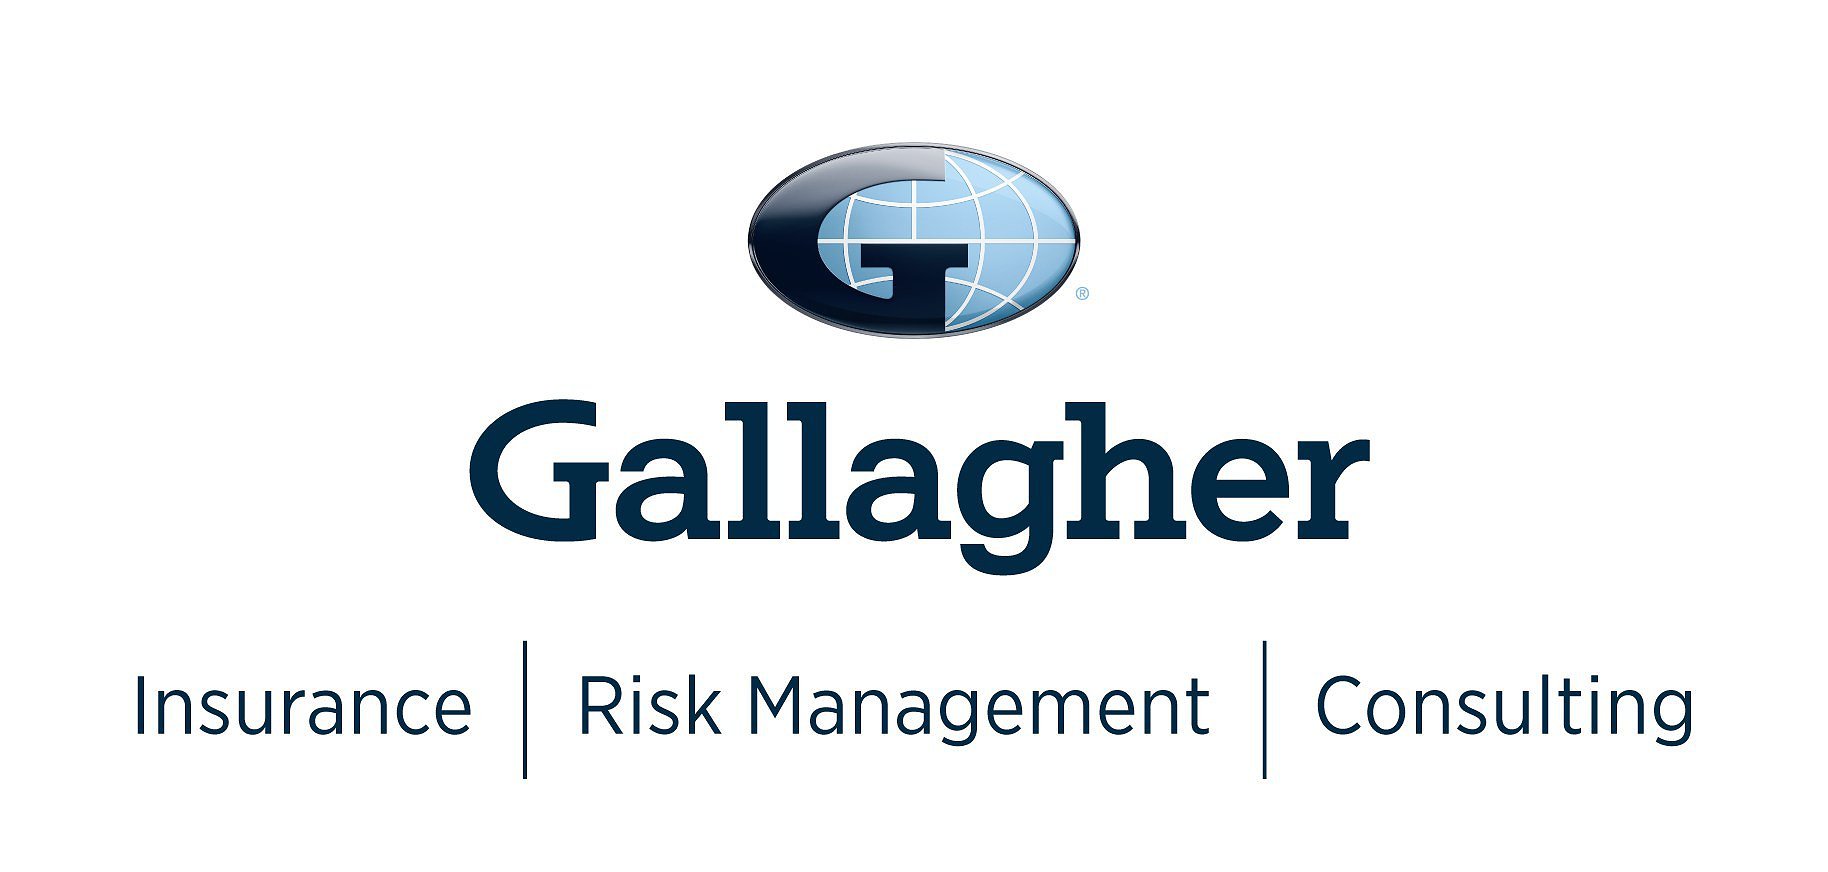 Gallagher's event - London: Gallagher: Insurance, Risk & Consulting Work Experience Day